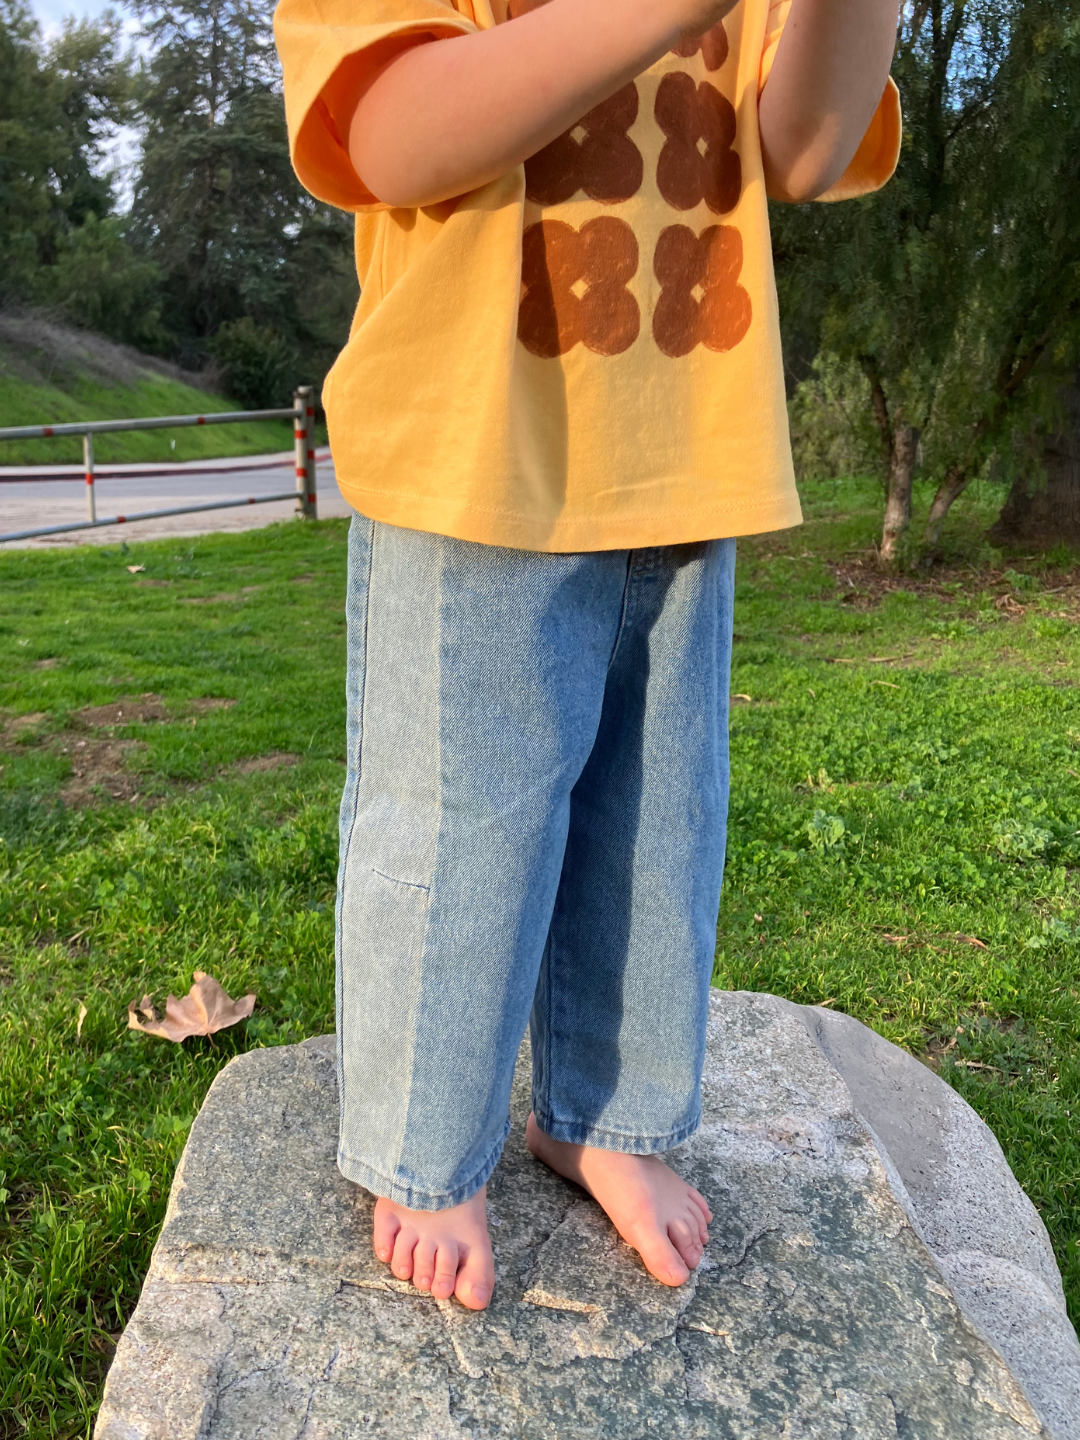 A child is wearing Dart Jeans with a yellow t-shirt